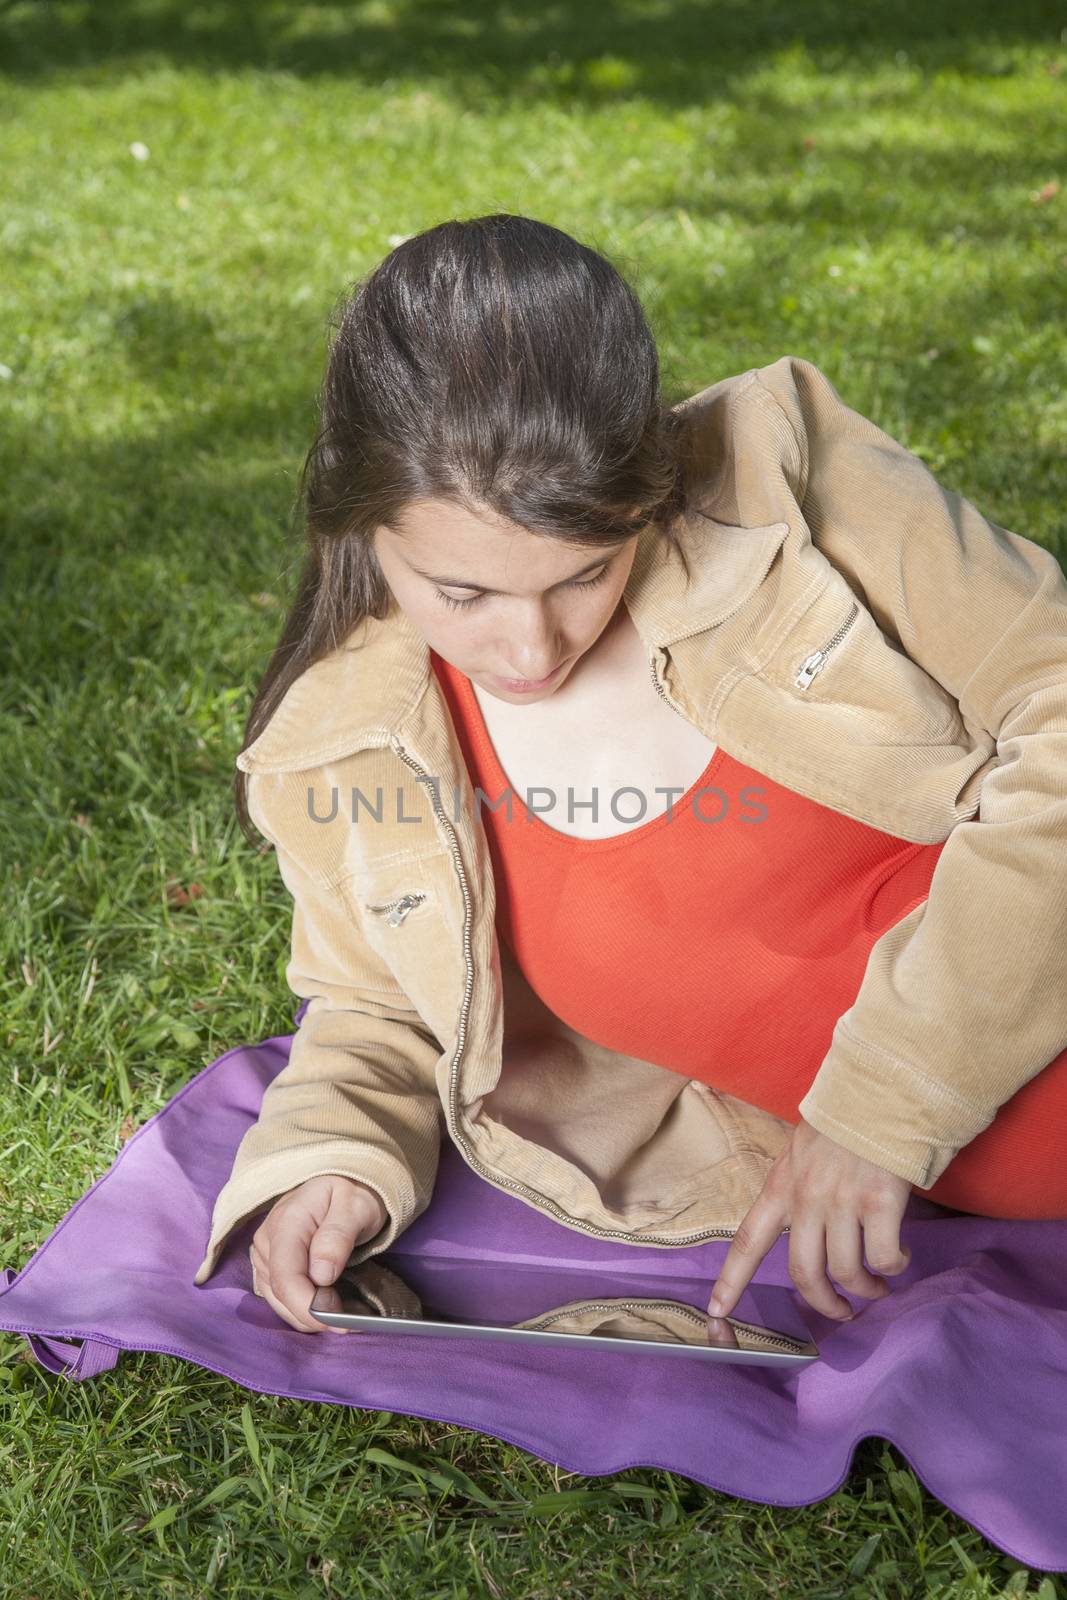 pregnant young woman with orange shirt touching tablet at a park in Madrid Spain Europe